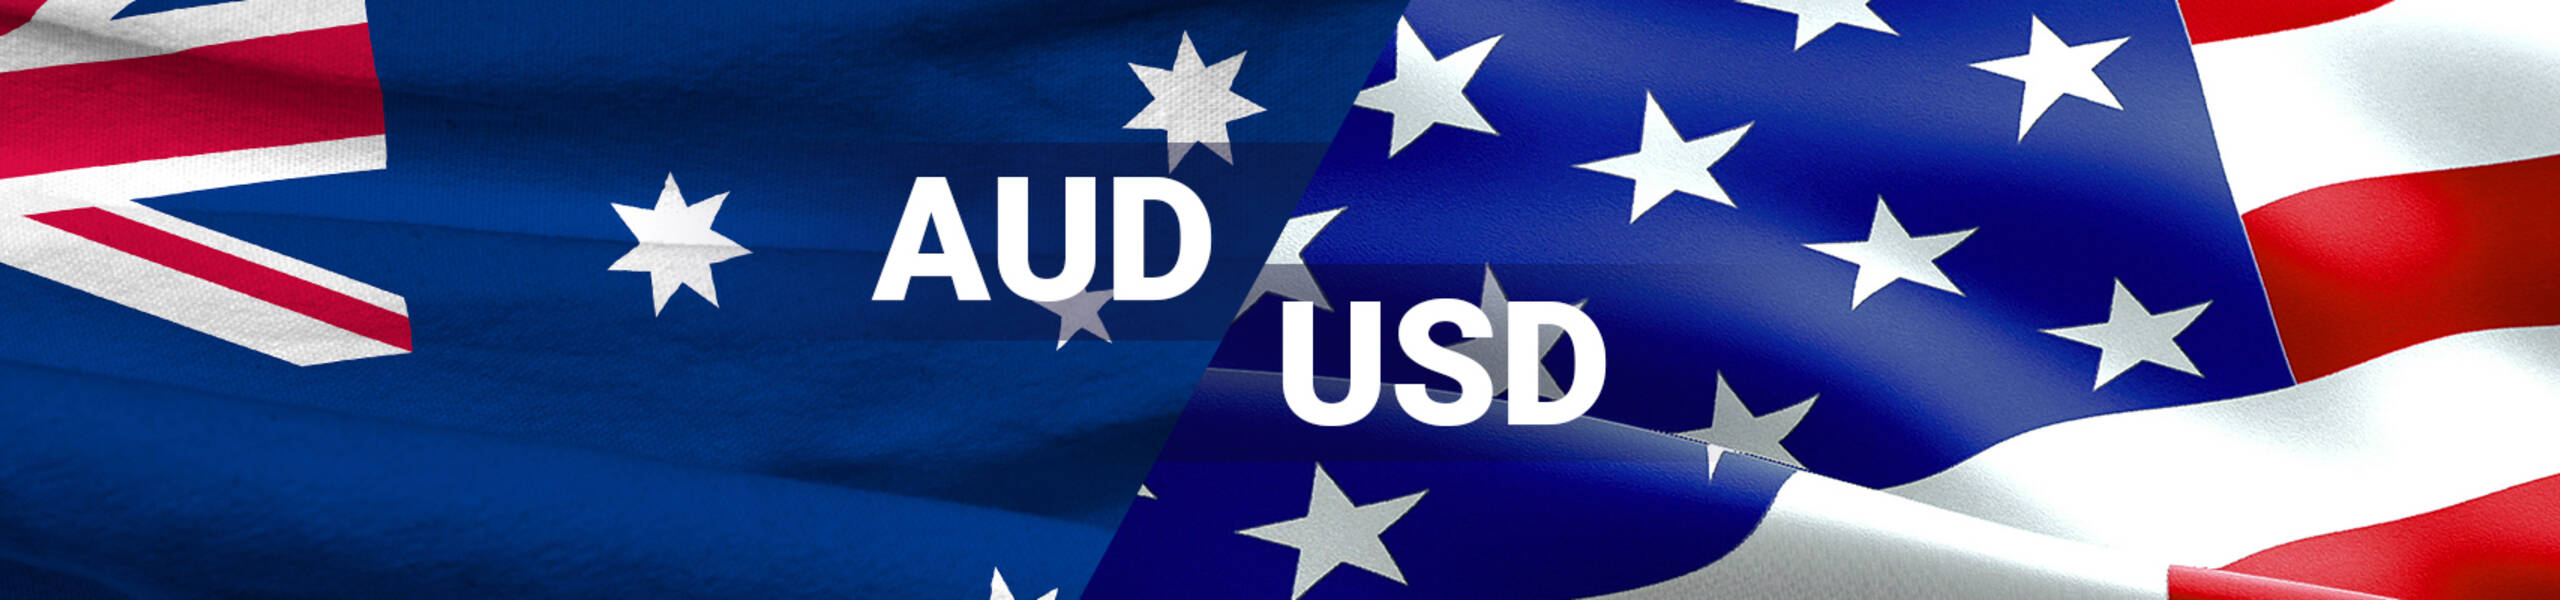 AUD/USD: trend turns down